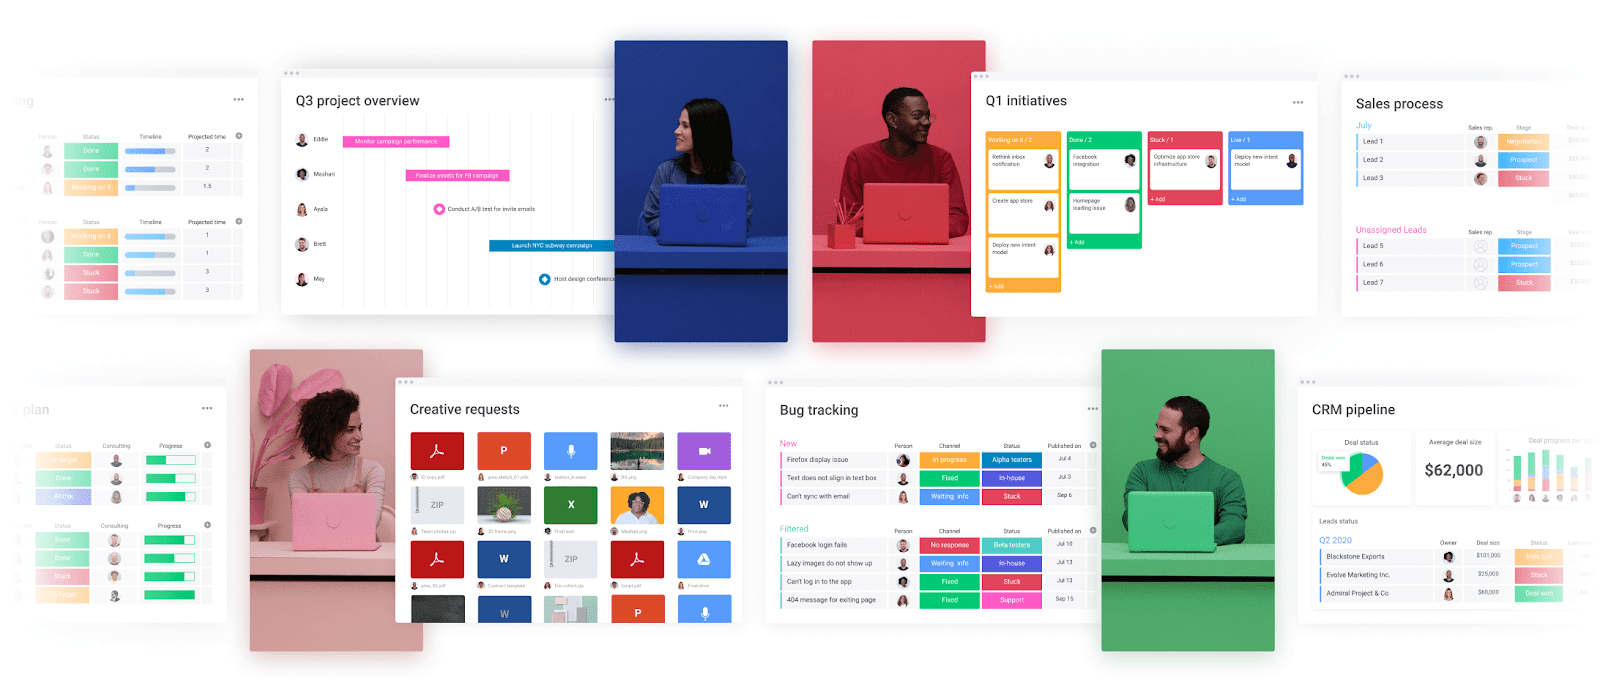 monday.com's visual dashboards make it easy to see work at a glance.